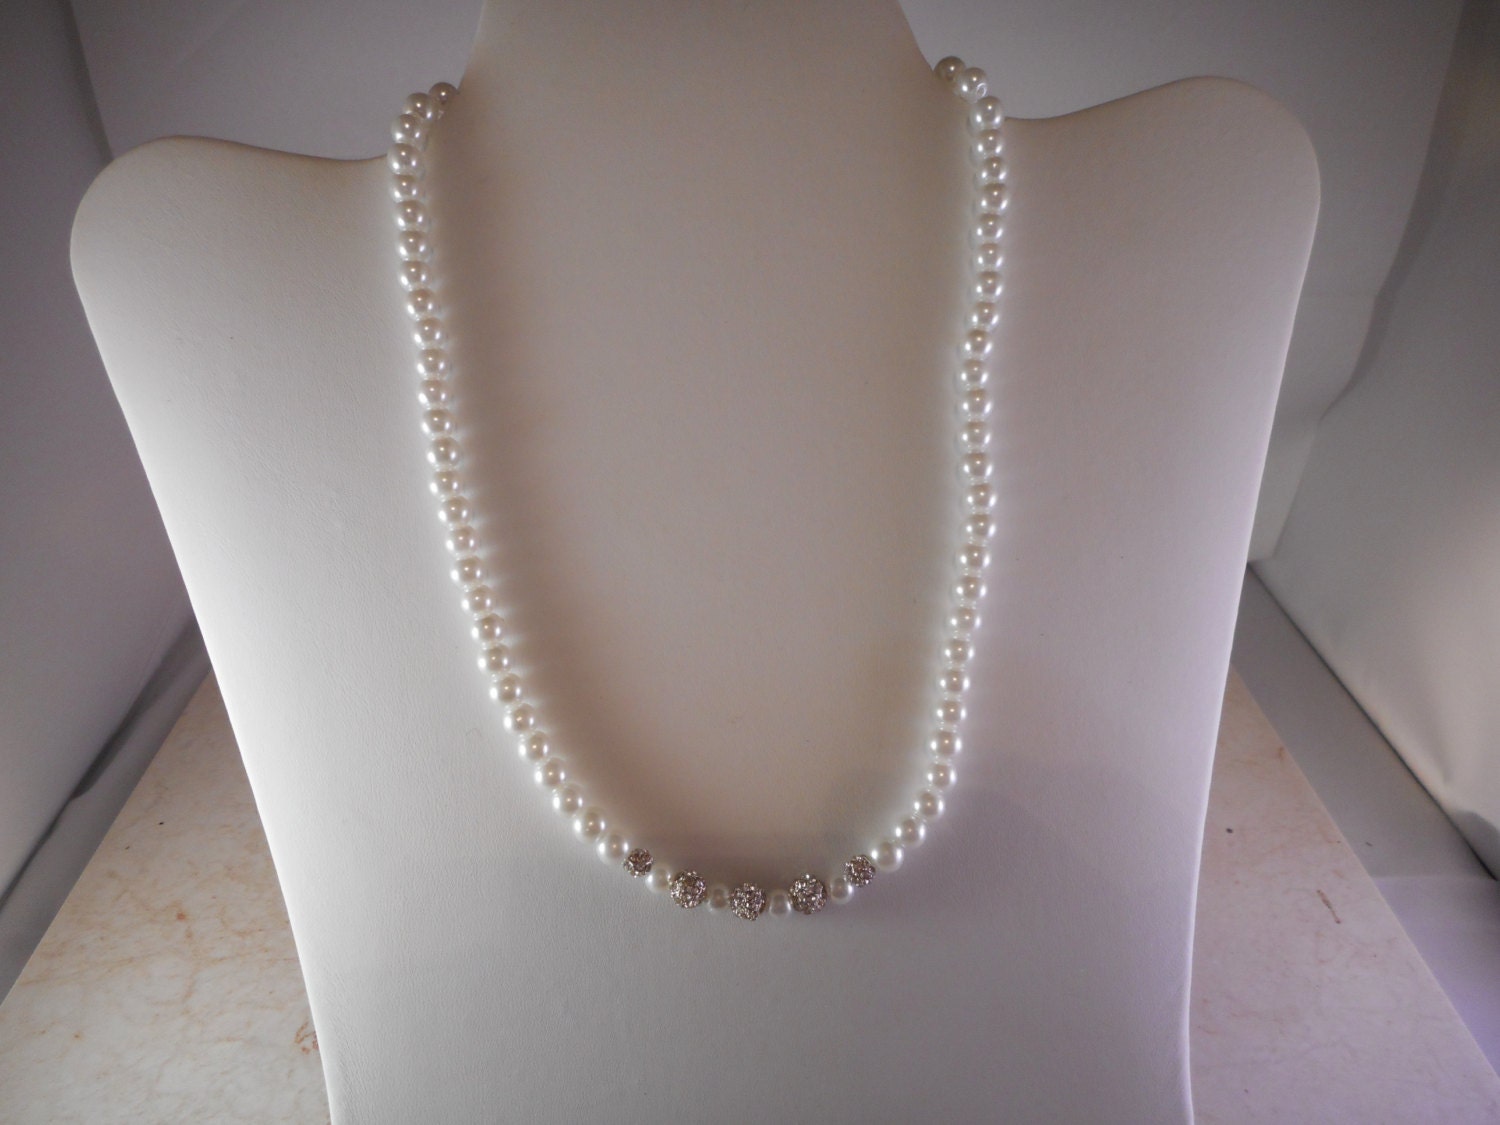 Choker Necklace with Faux Pearls and Rhinestone Beads Made by Icing ...